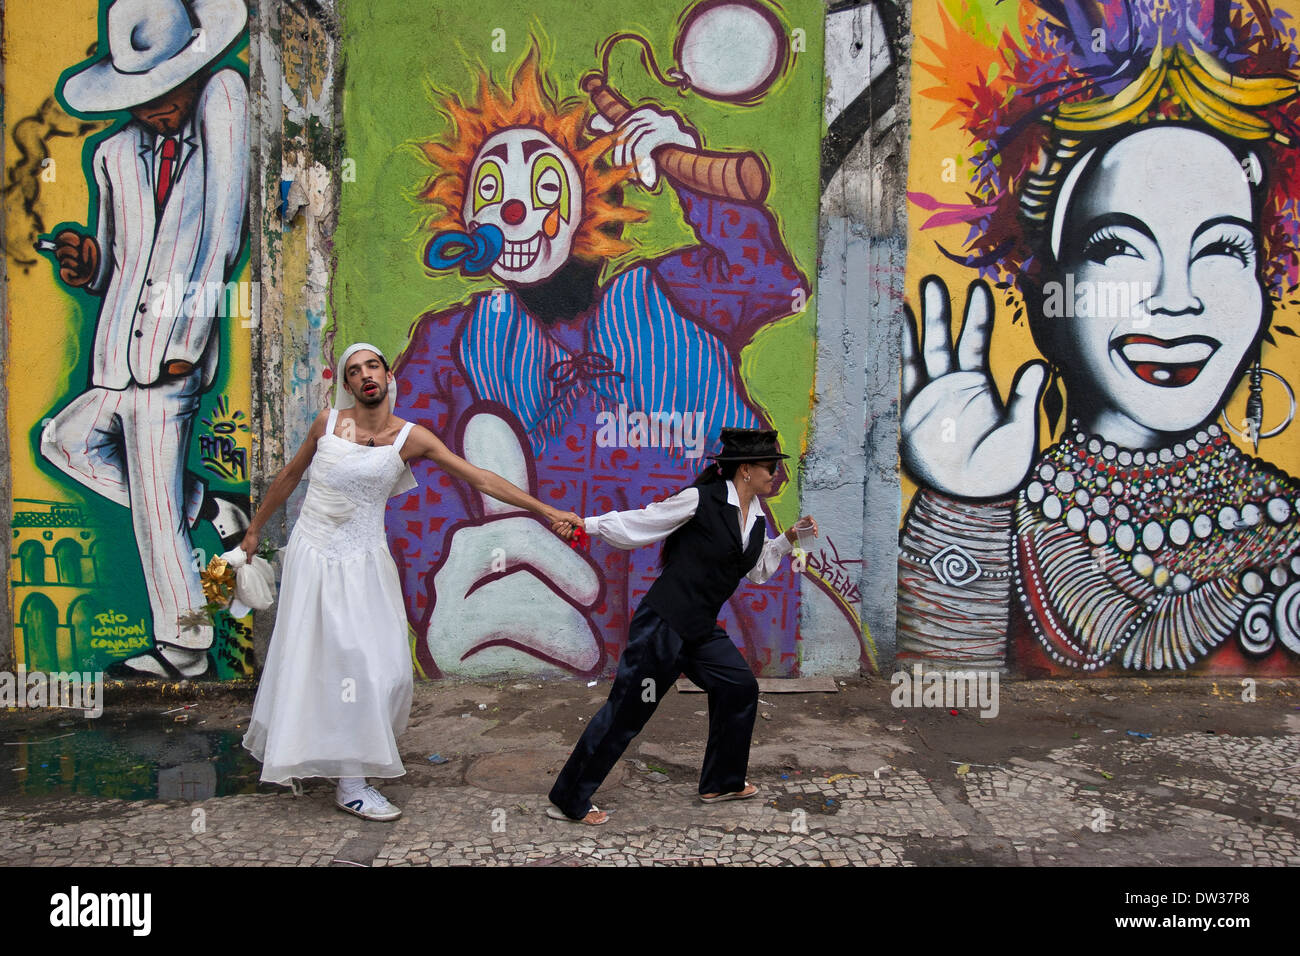 Merrymakers, Rio de Janeiro street carnival, Brazil. Drunk bride, carioca´s lifestyle, irreverent and playful Stock Photo